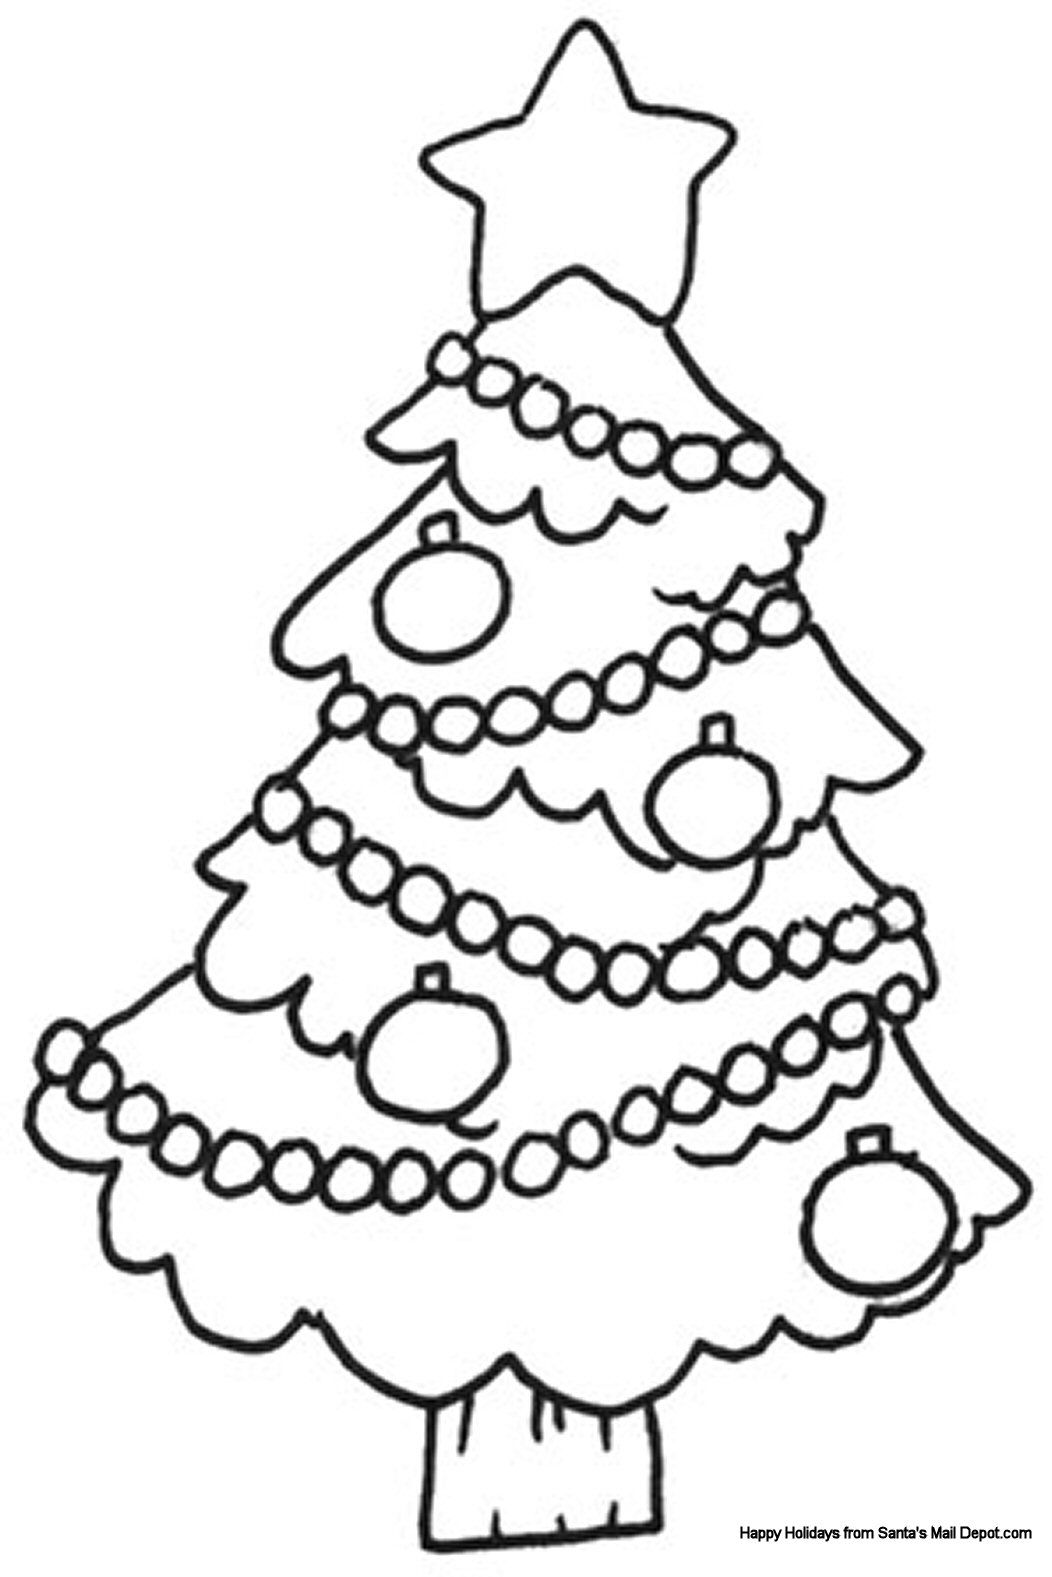 Coloring pages | Christmas Coloring Pages, Free ...